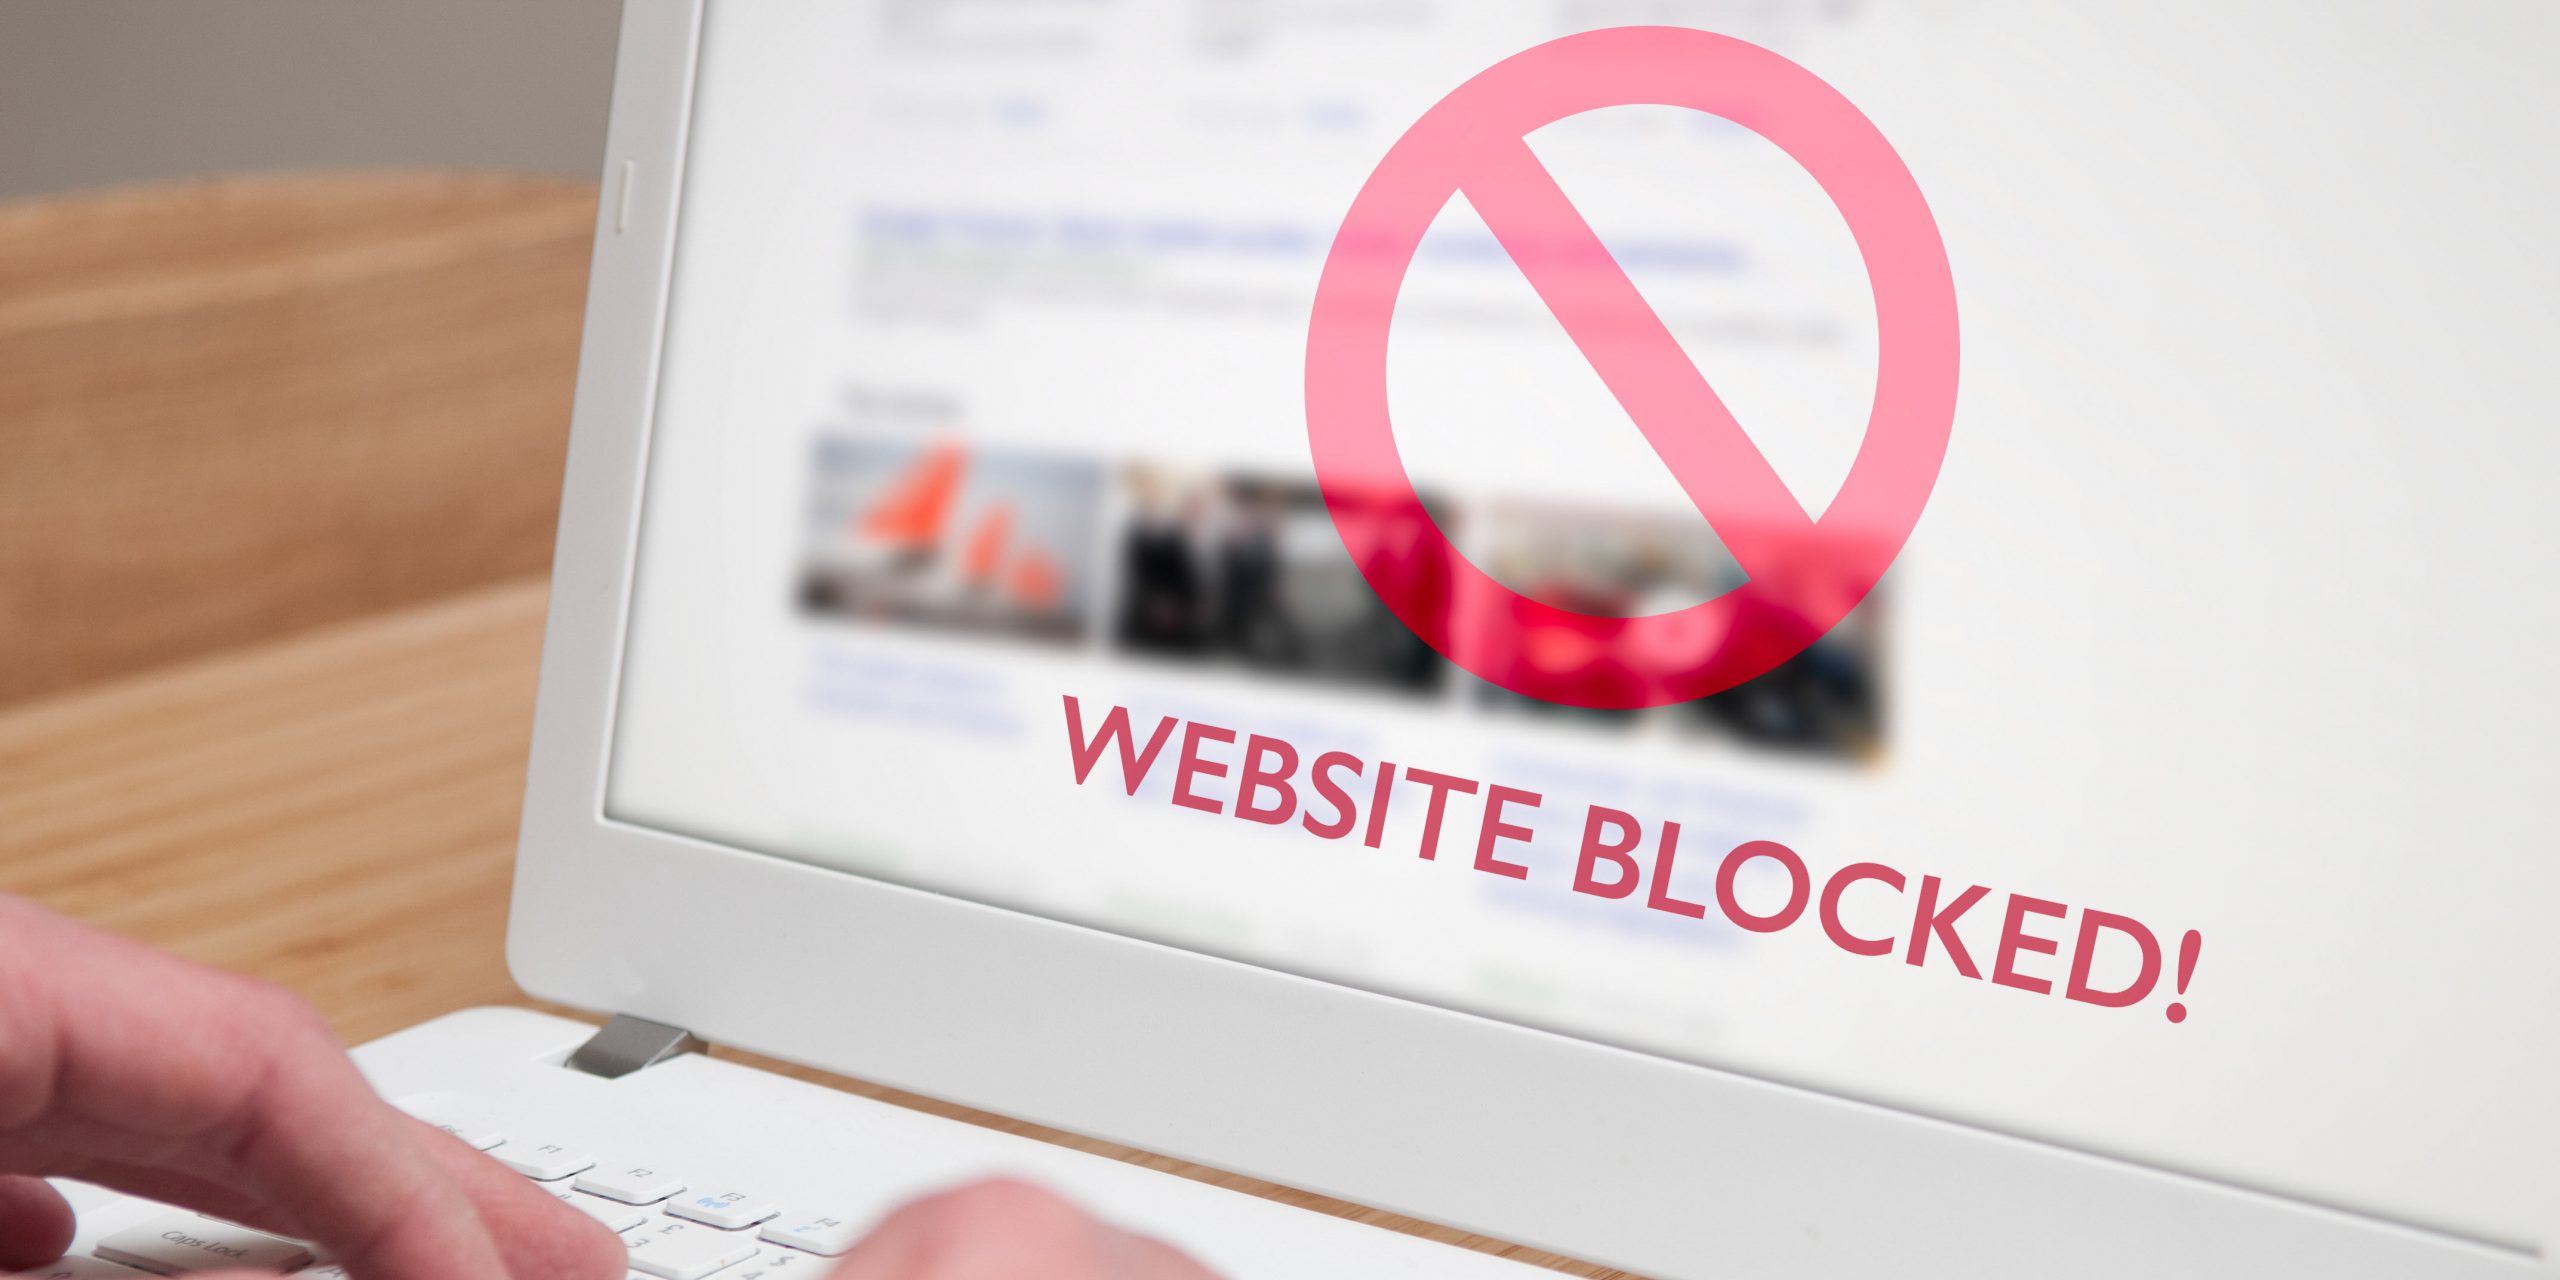 Check out how to block a website